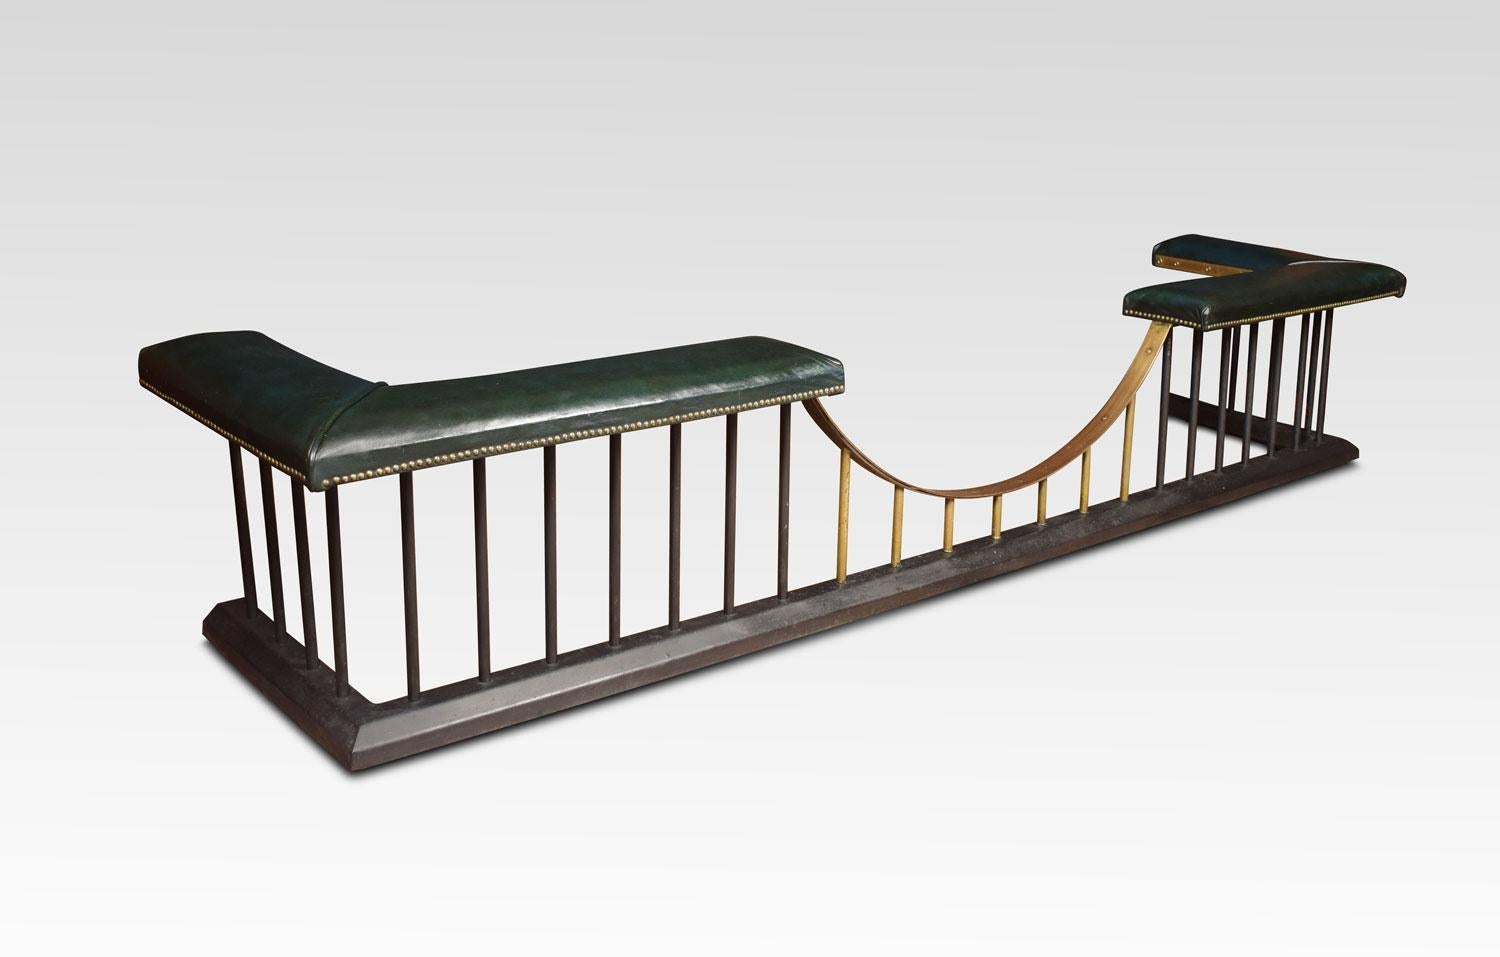 Brass and steel club Fender, of very large proportions. The green leather upholstered seats, resting on tubular sports. All raised up on moulded platform base.
Dimensions:
Height 21 inches
External measurements:
Length 123 inches
Depth 26.5